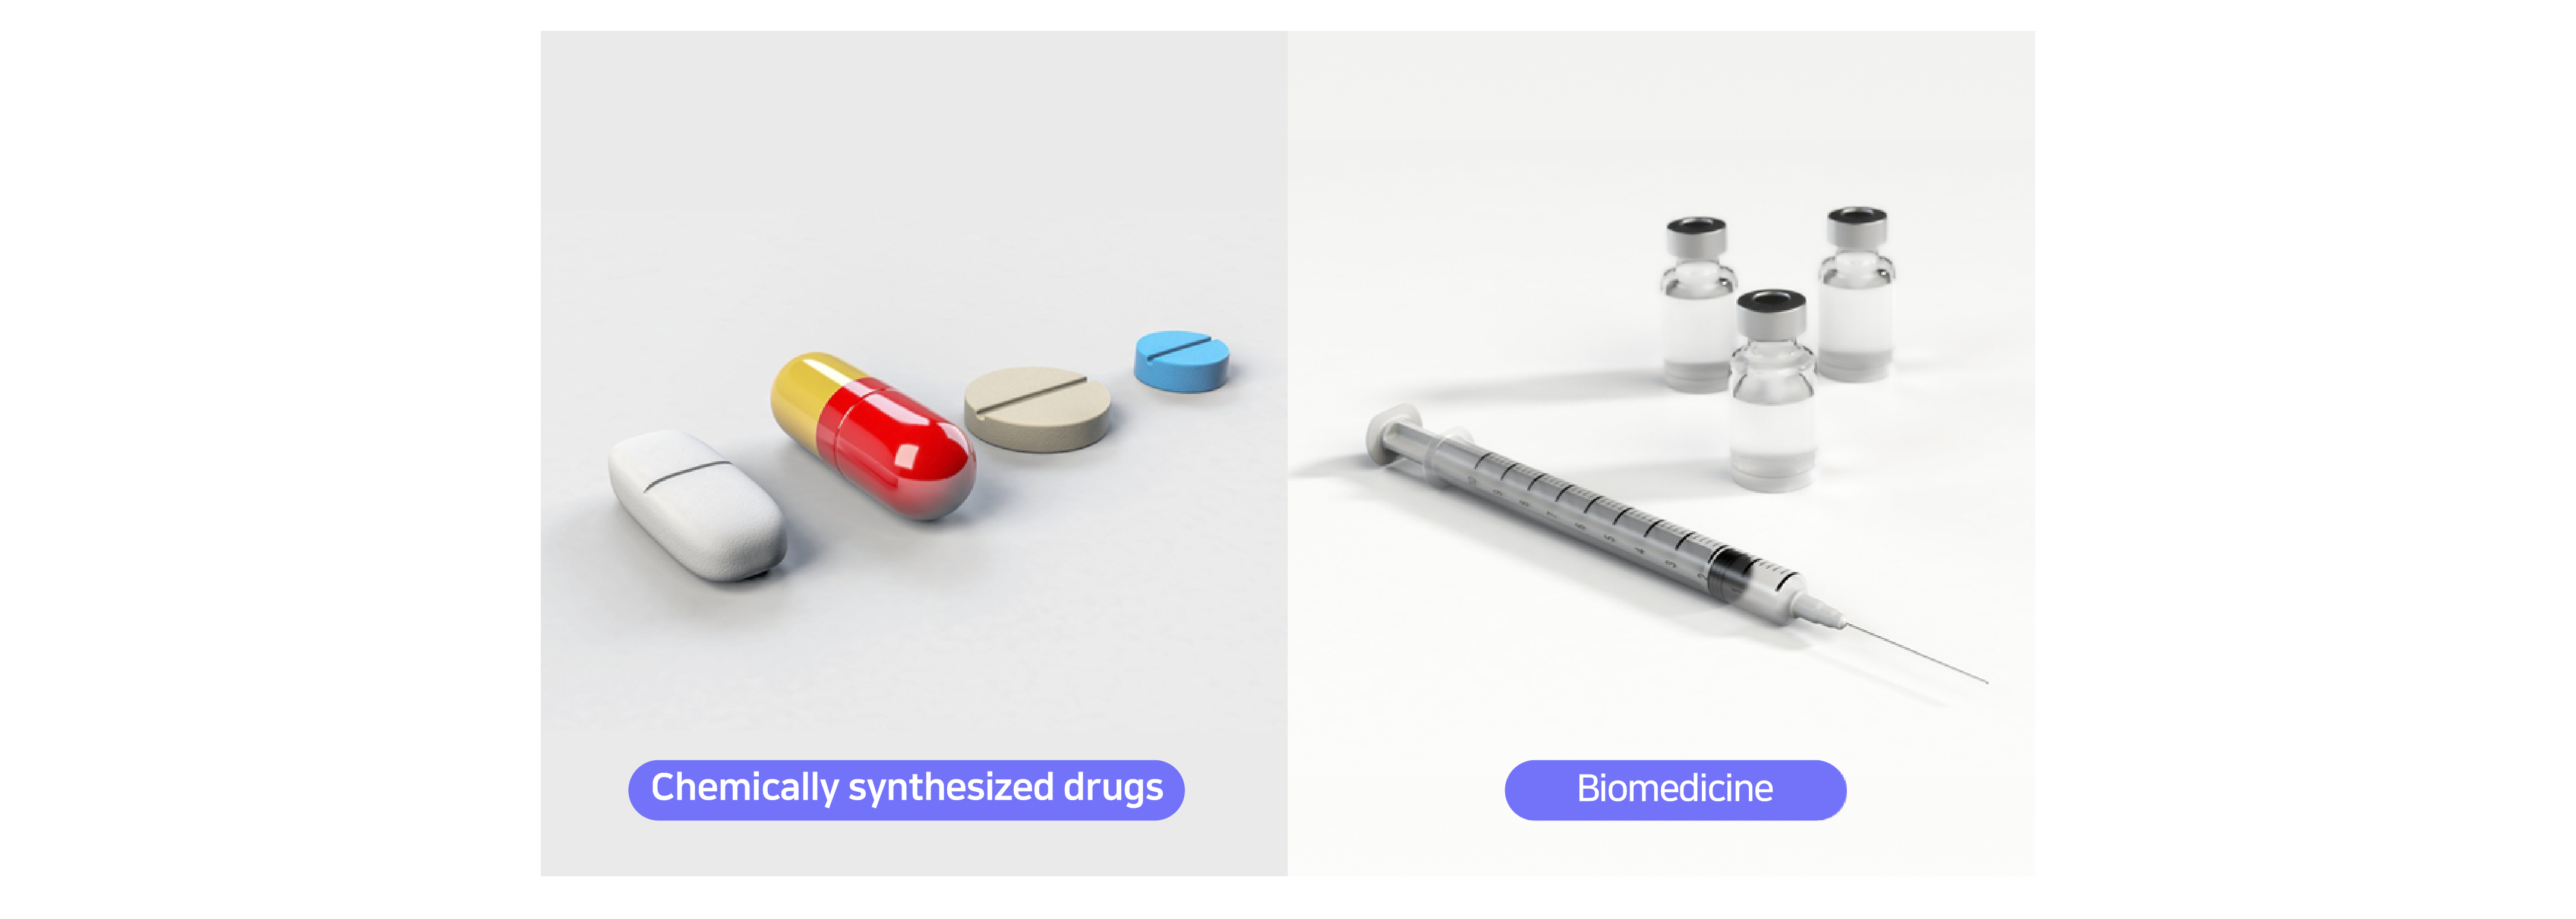 Chemically synthesized drugs, Biomedicine